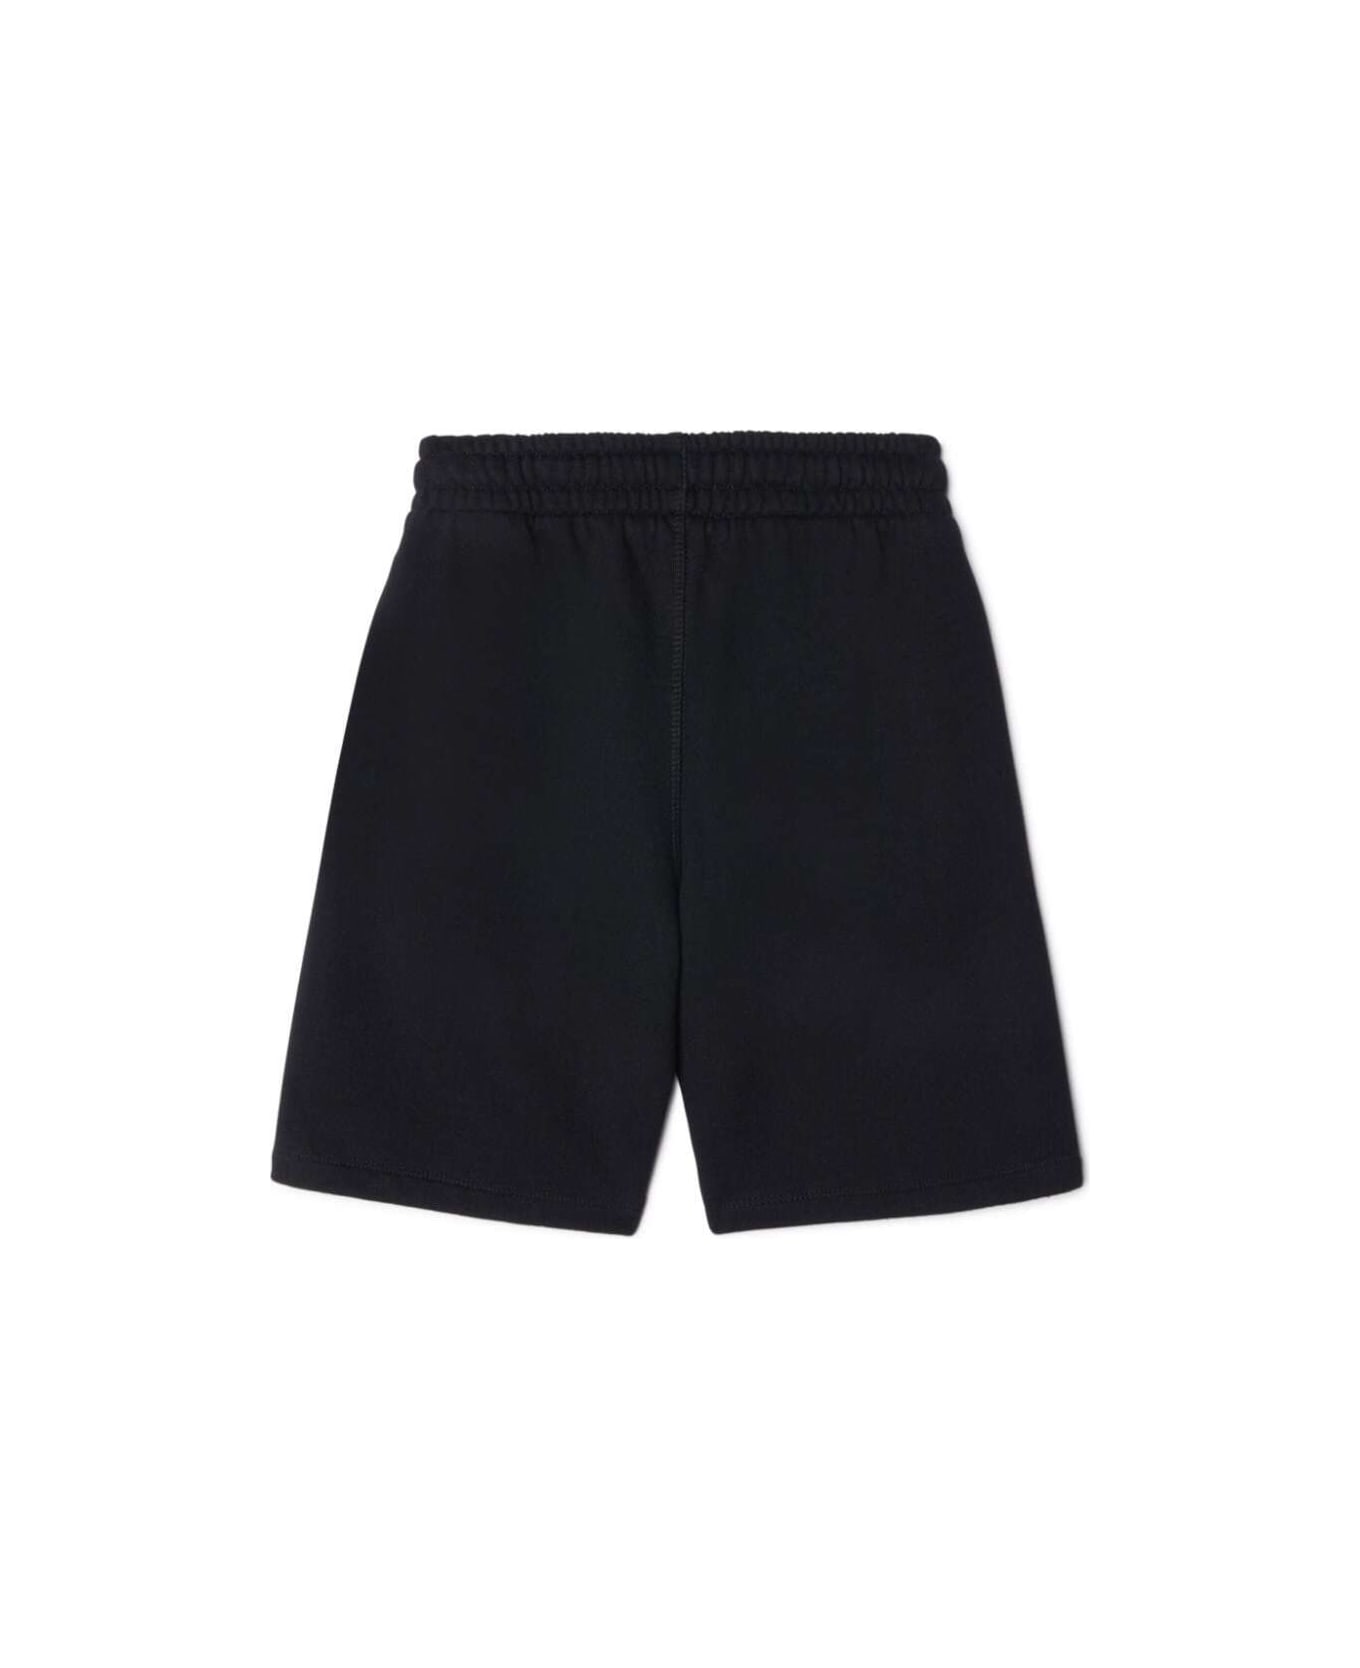 Off-White Black Shorts With Drawstring In Cotton Boy - Black